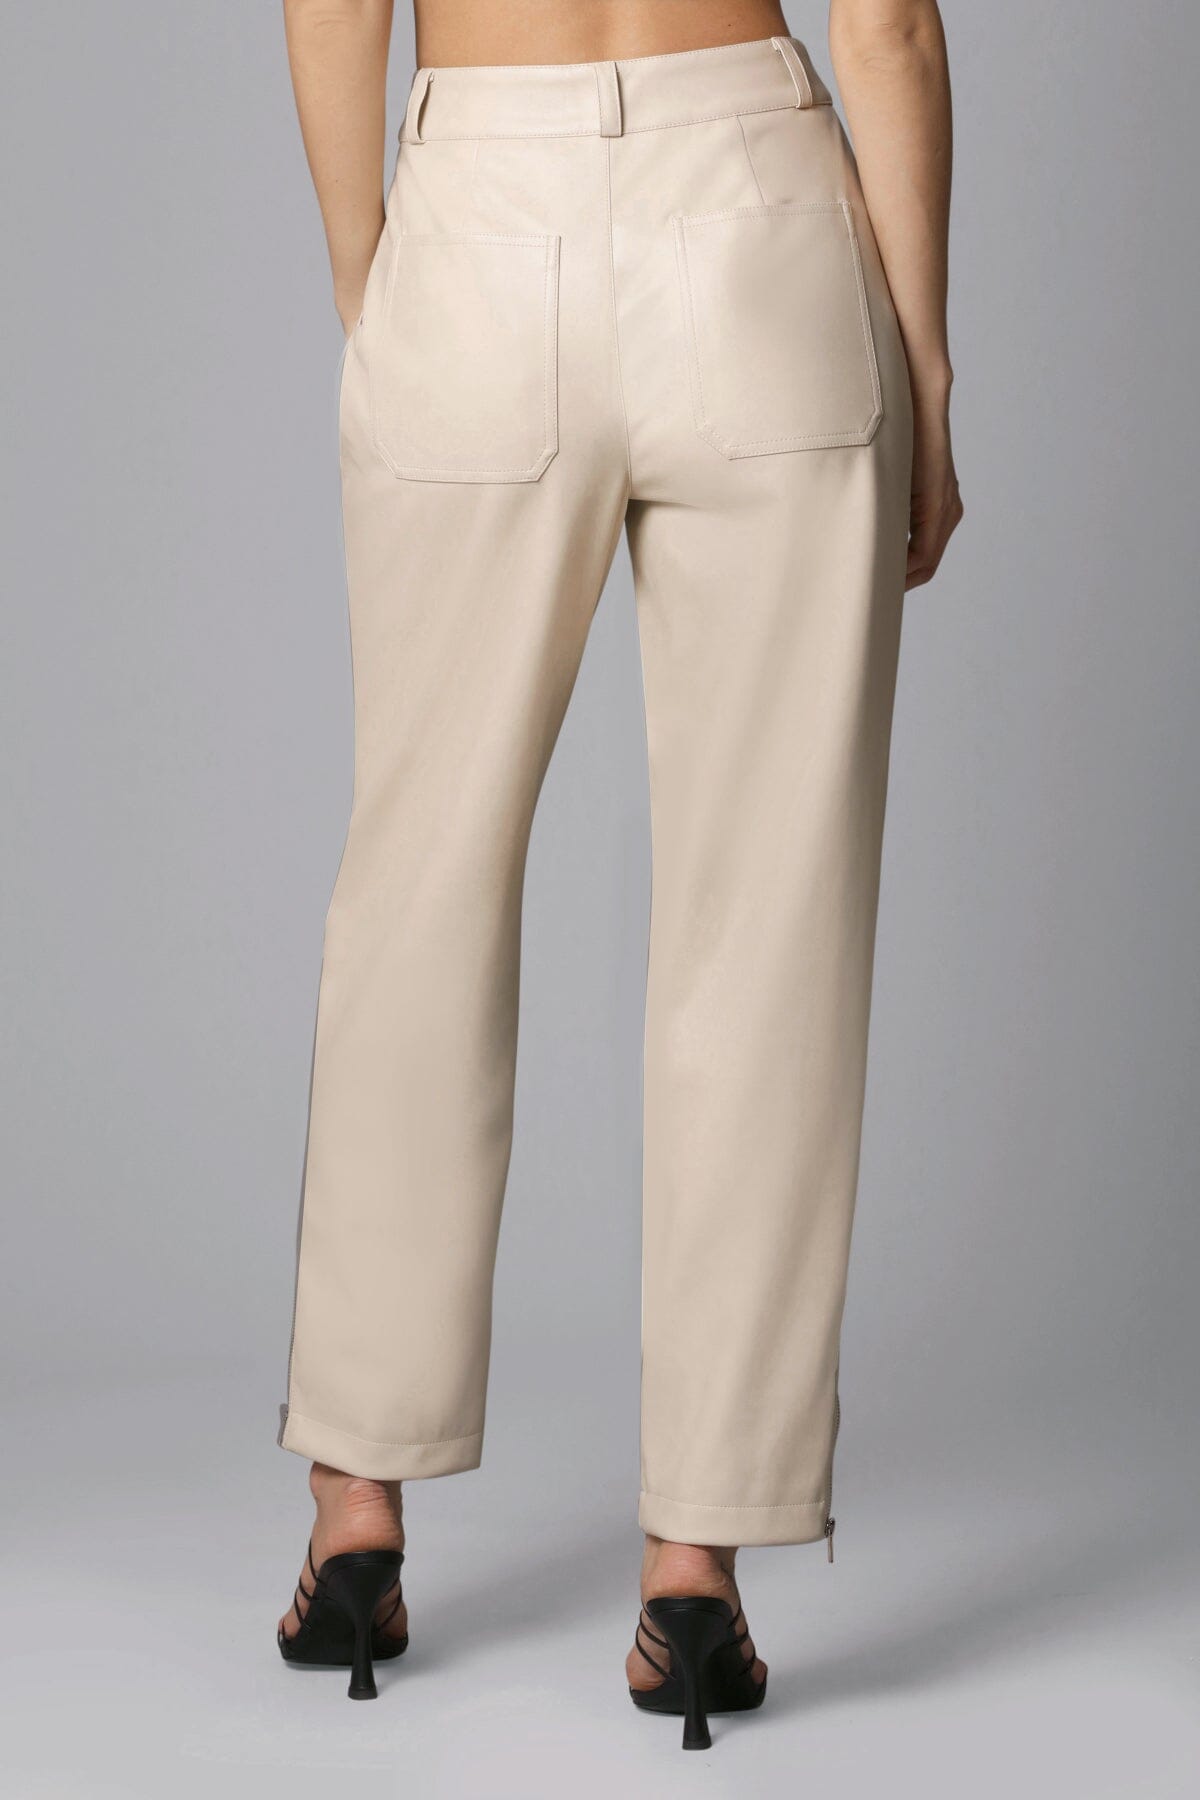 bone beige off white faux ever leather tapered pant - women's figure flattering stylish fall 2023 pants